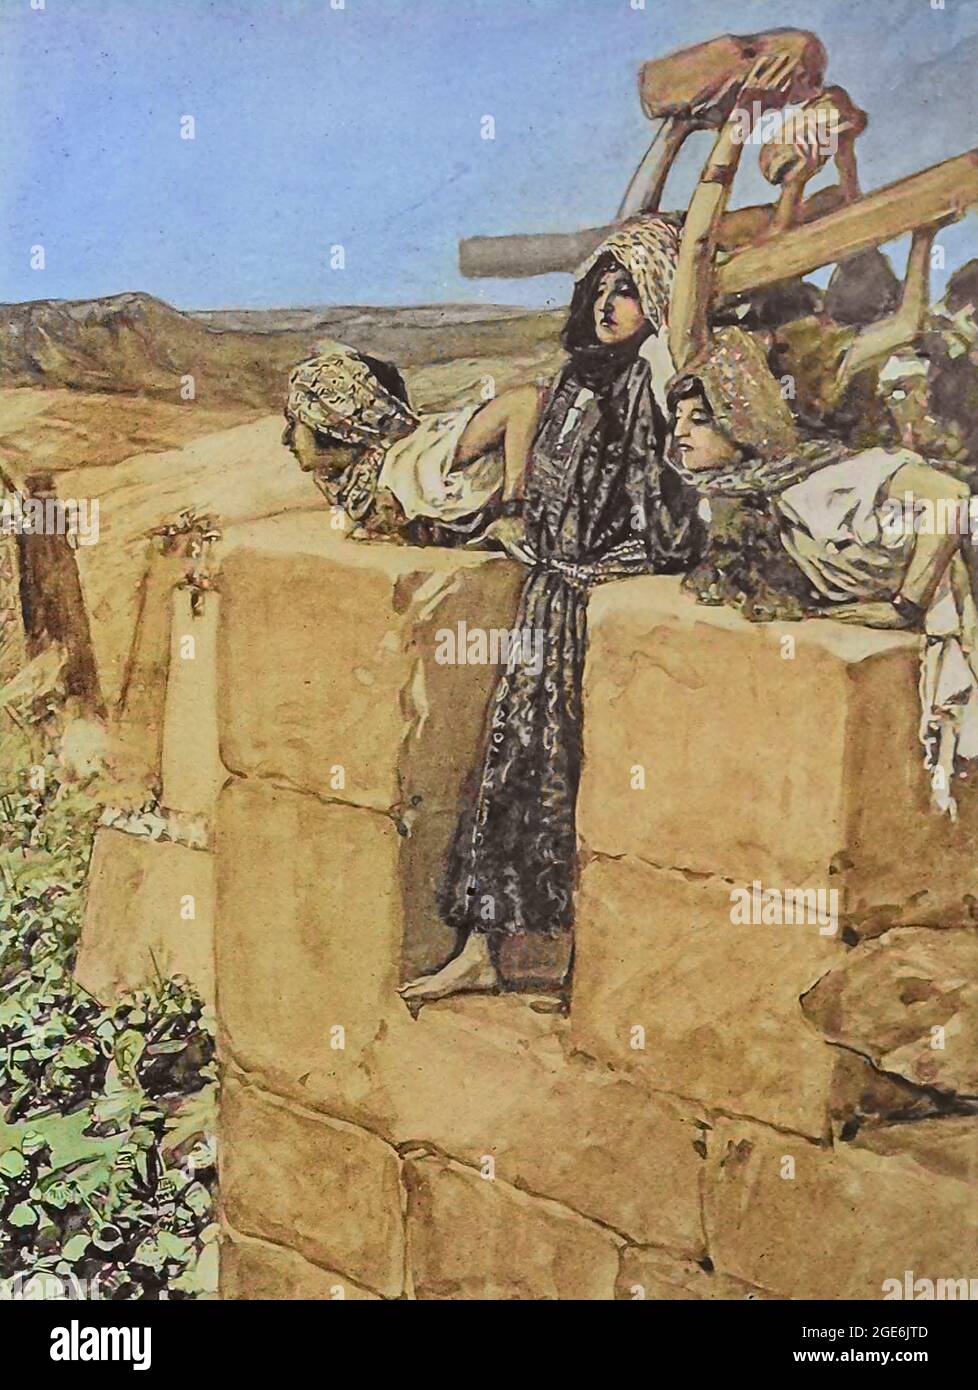 A Woman Breaks The Skull Of Abimelech Judges Ix 53 And A Certain Woman Cast A Piece Of A Millstone Upon Abimelech S Head And All To Break His Skull From The Book